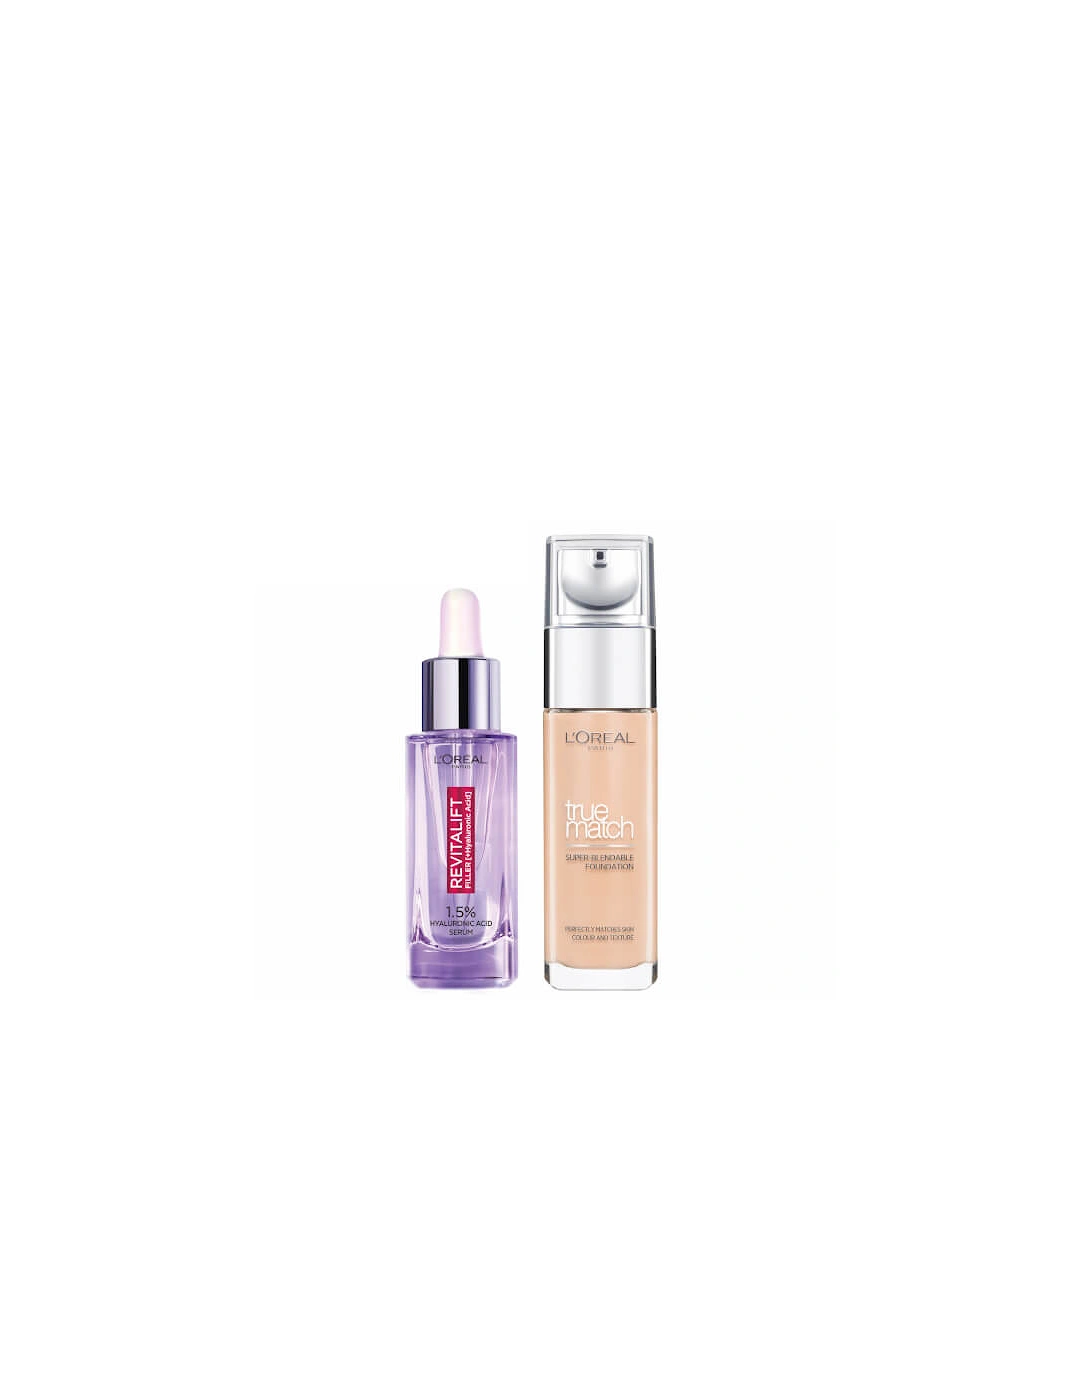 L’Oreal Paris Hyaluronic Acid Filler Serum and True Match Hyaluronic Acid Foundation Duo - 5C Rose Sand, 2 of 1